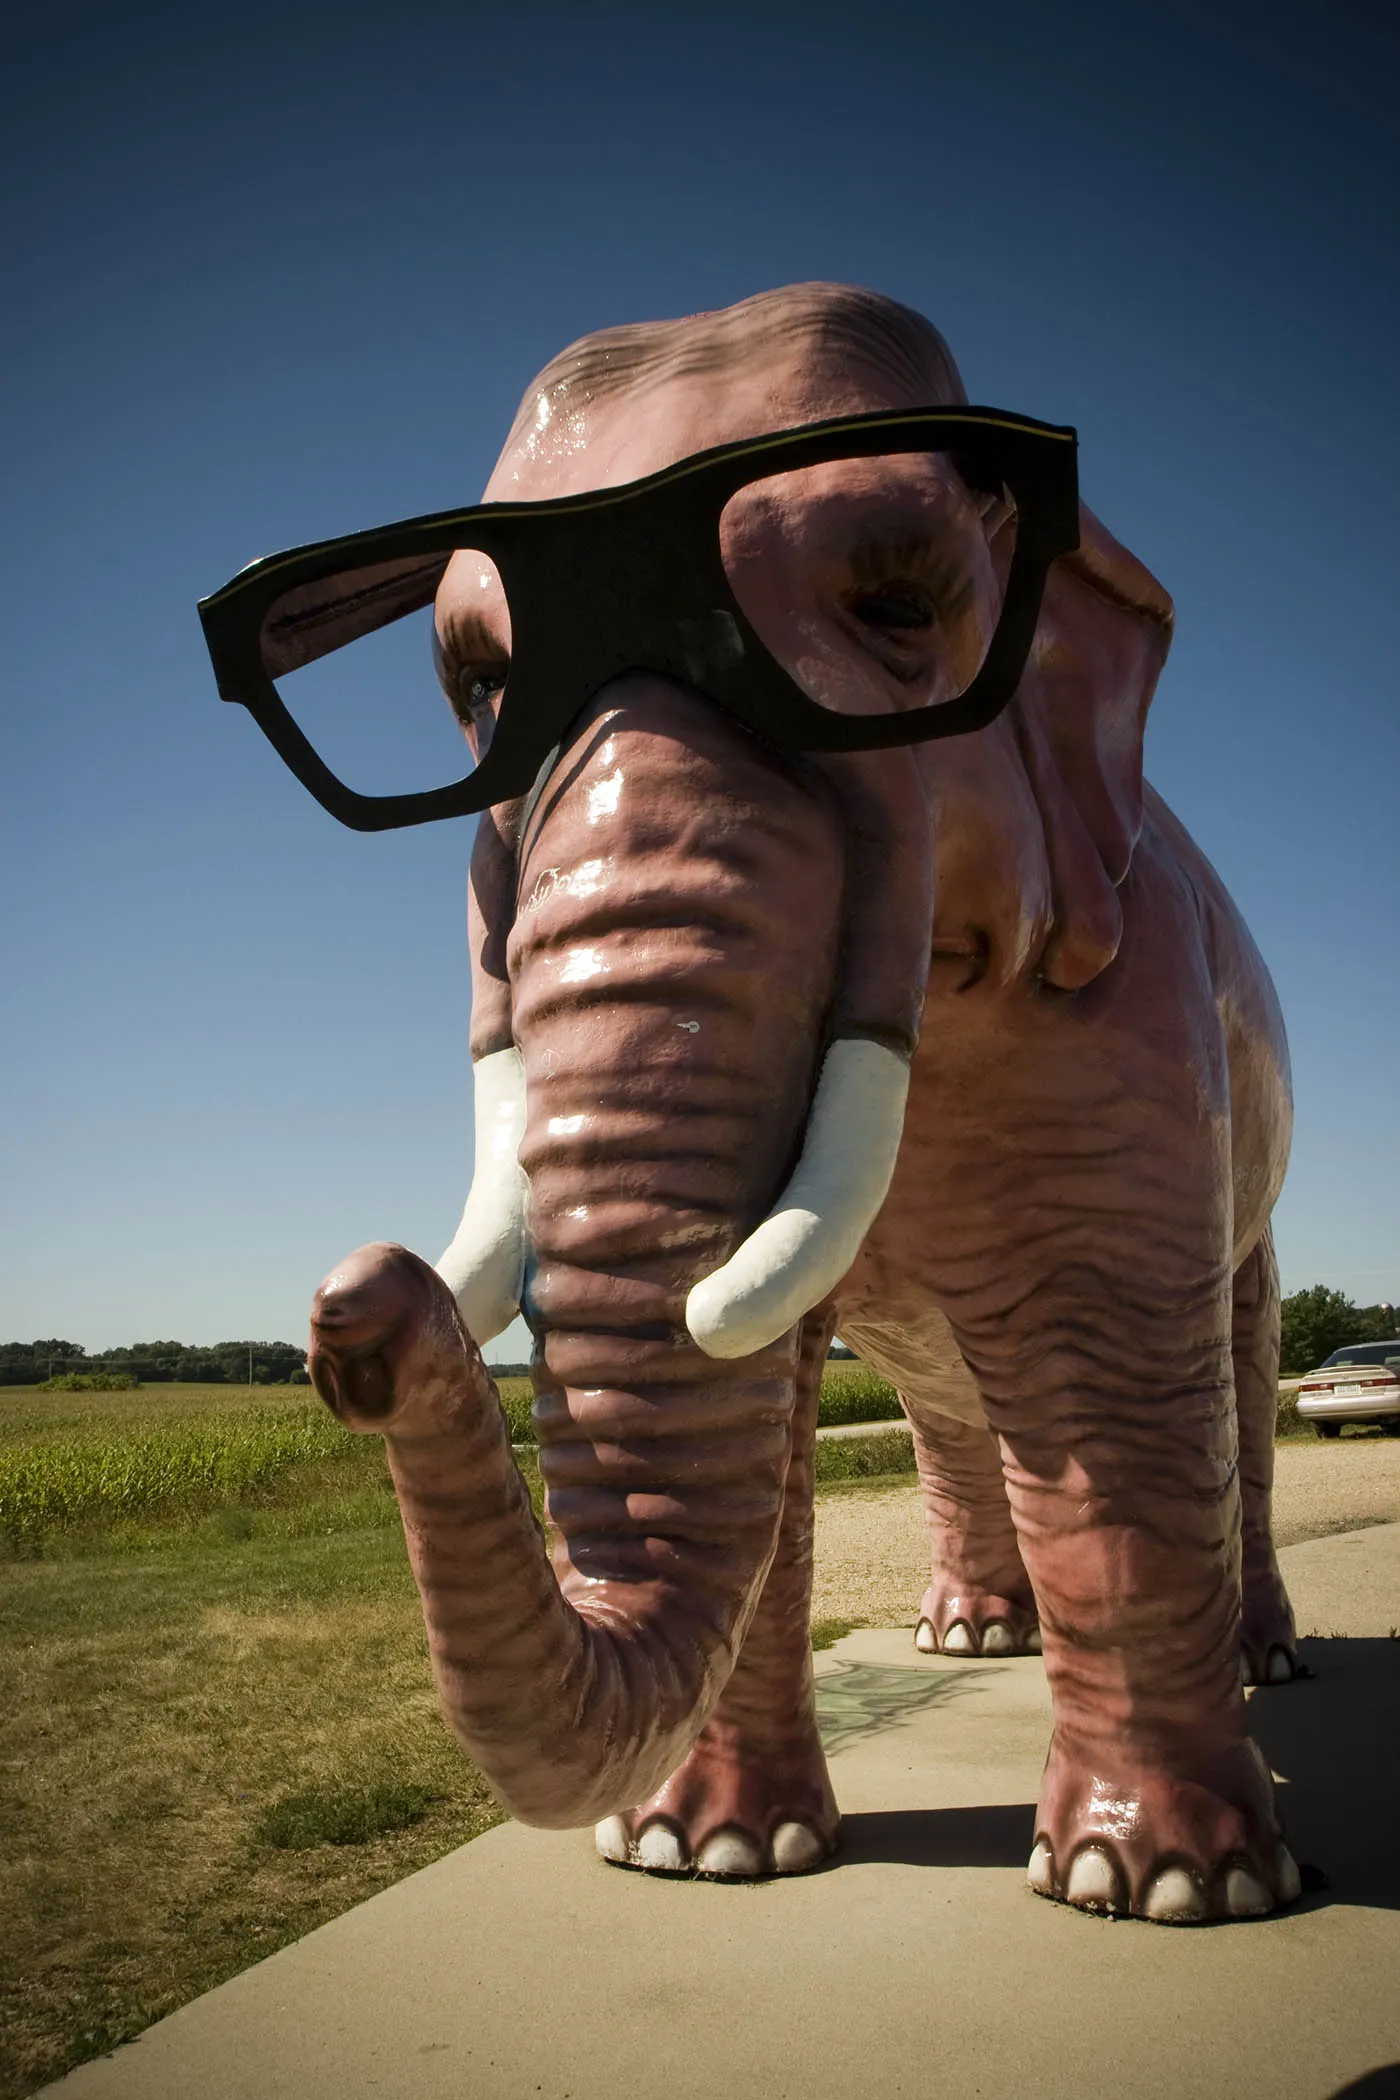 Pink Elephant with Glasses - a roadside attraction in DeForest, Wisconsin